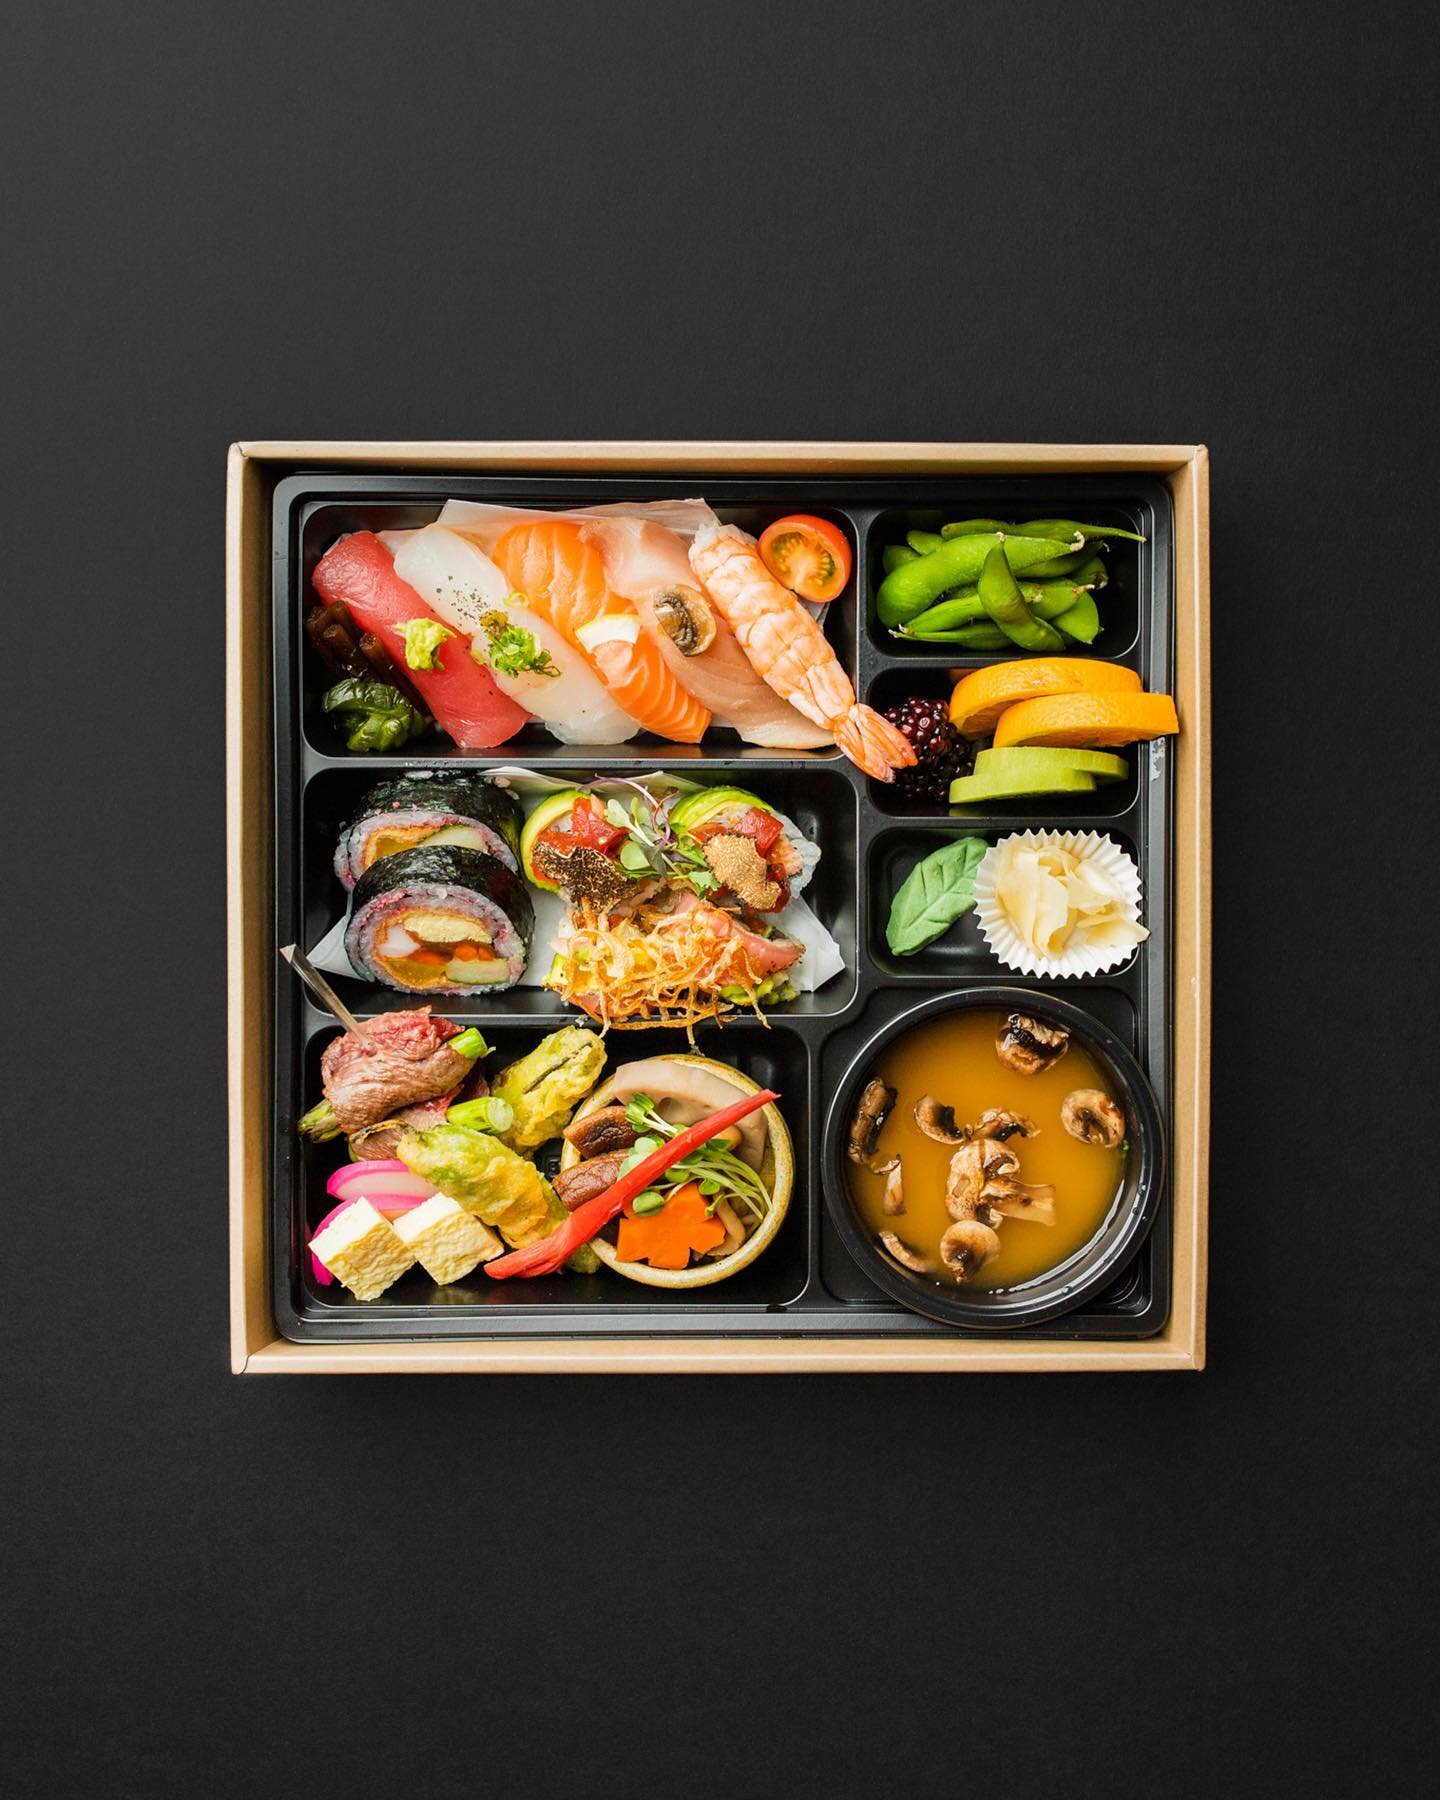 I love it when my clients make cool shit 🙌 This shoot for @norisushibar combines food photography with product photography, and is one of my fav productions because it&rsquo;s so different than the images I usually capture at the restaurant.

Believ